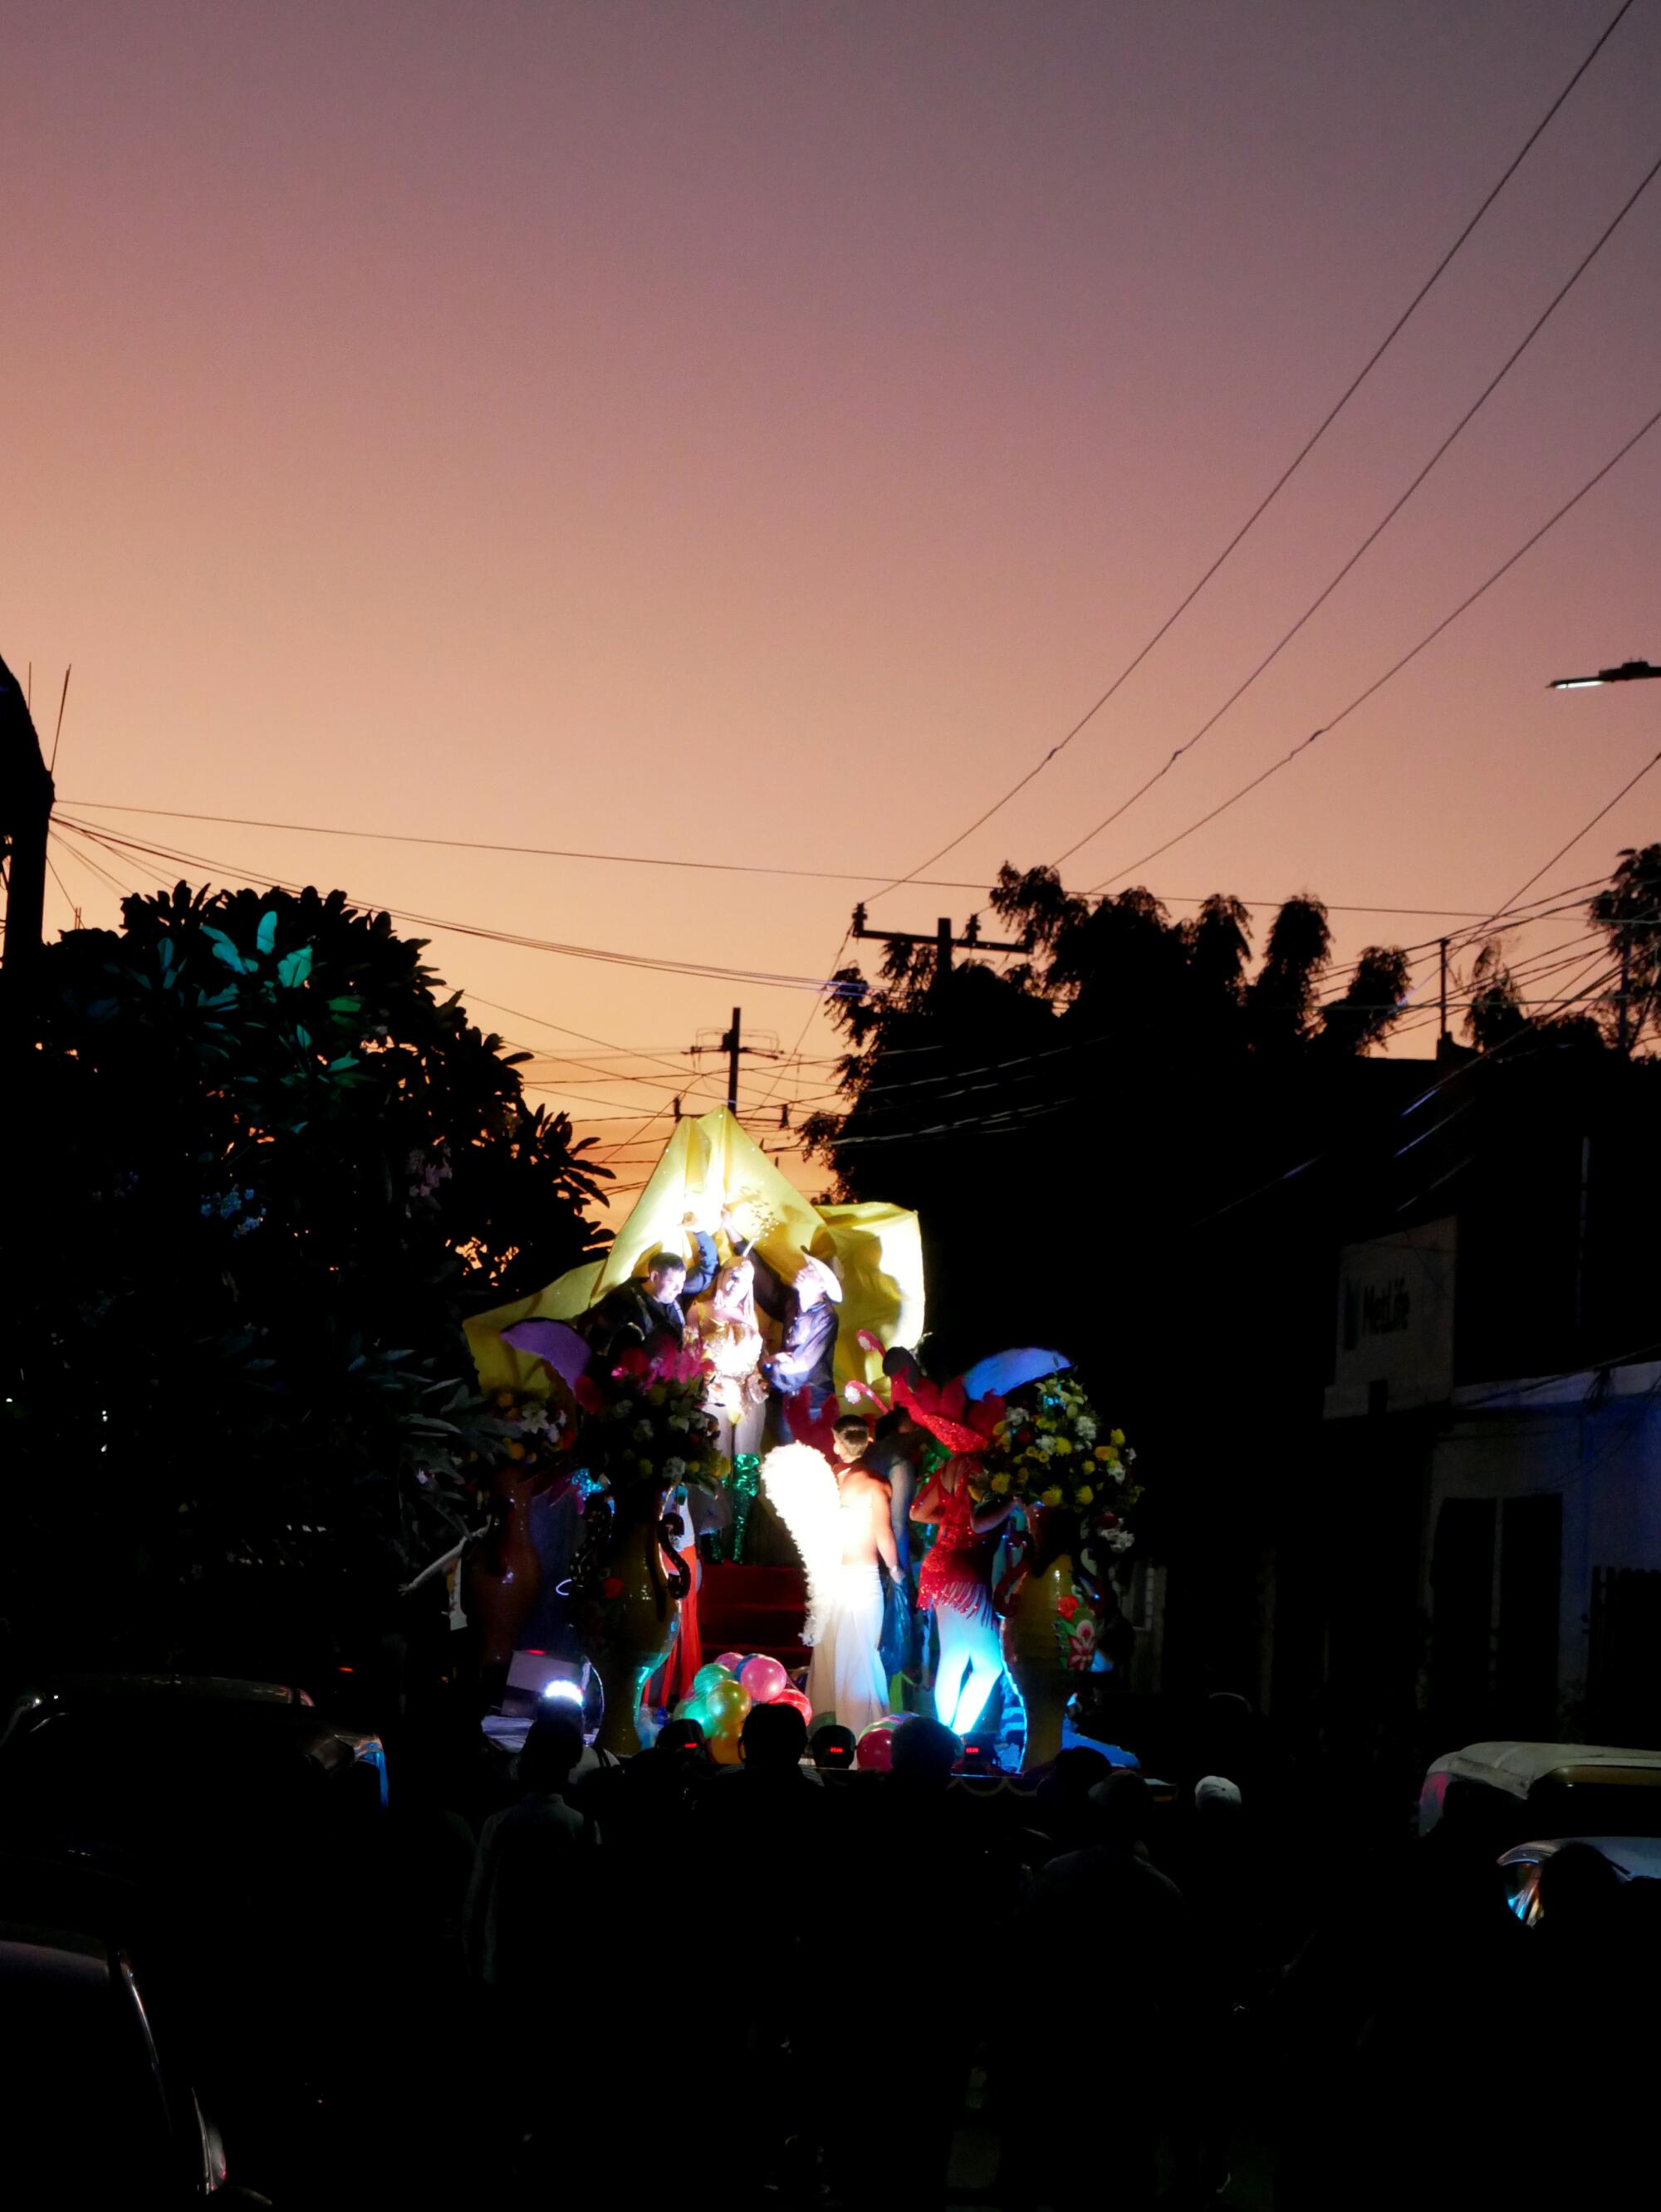 One of the several colorful installations exhibited during the street parade in Juchitan de Zaragoza, Oaxaca